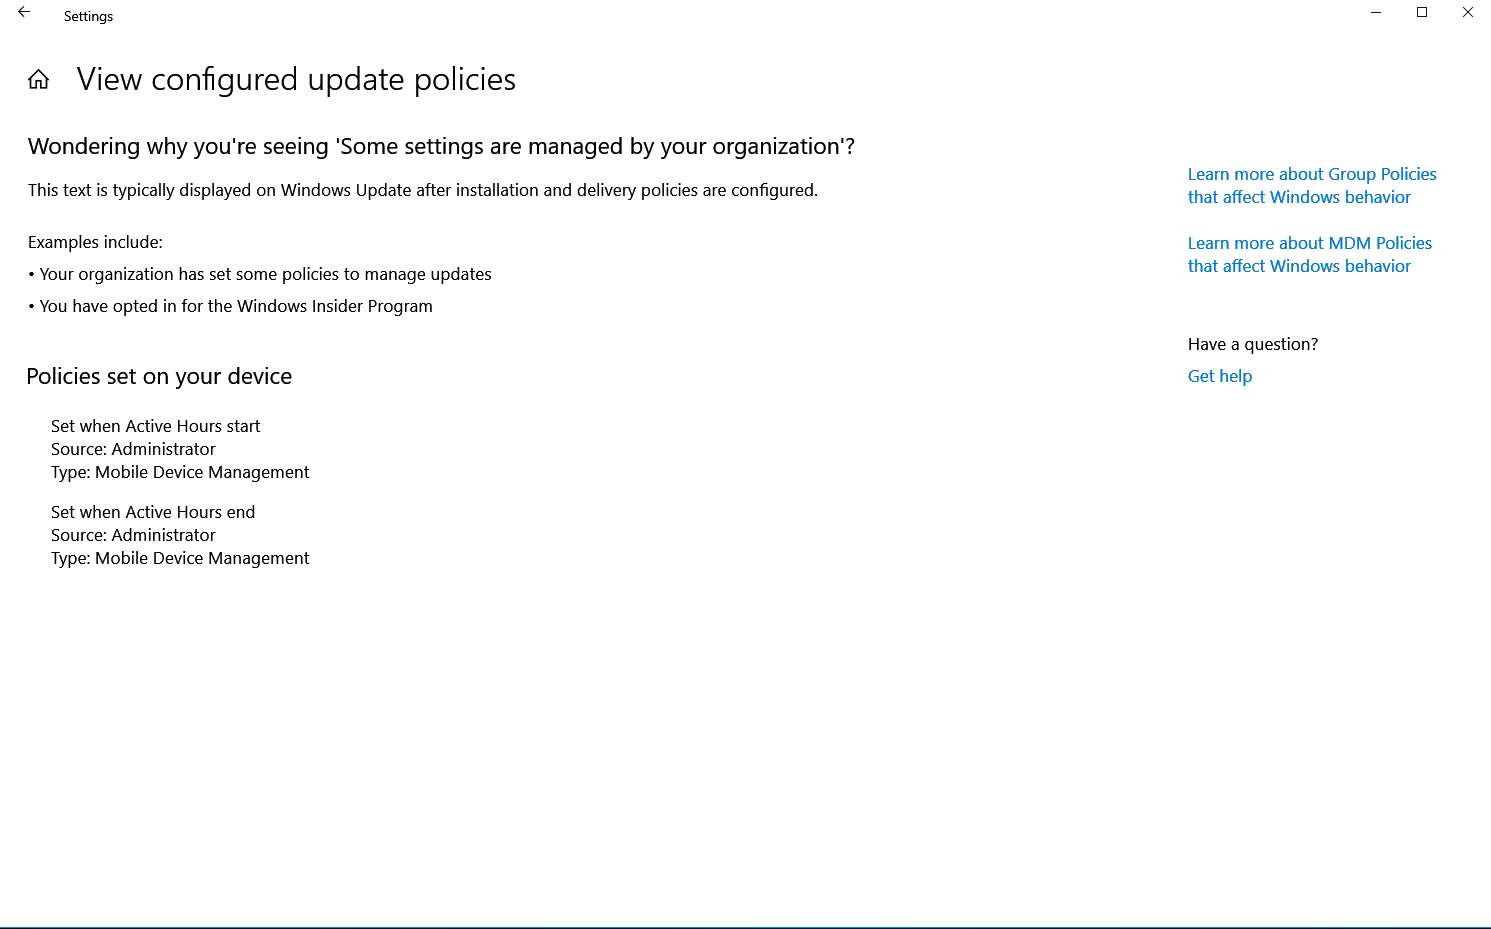 Windows update settings are managed by my organization 875fafac-6adf-430e-b5a3-aa70a44121e9?upload=true.png